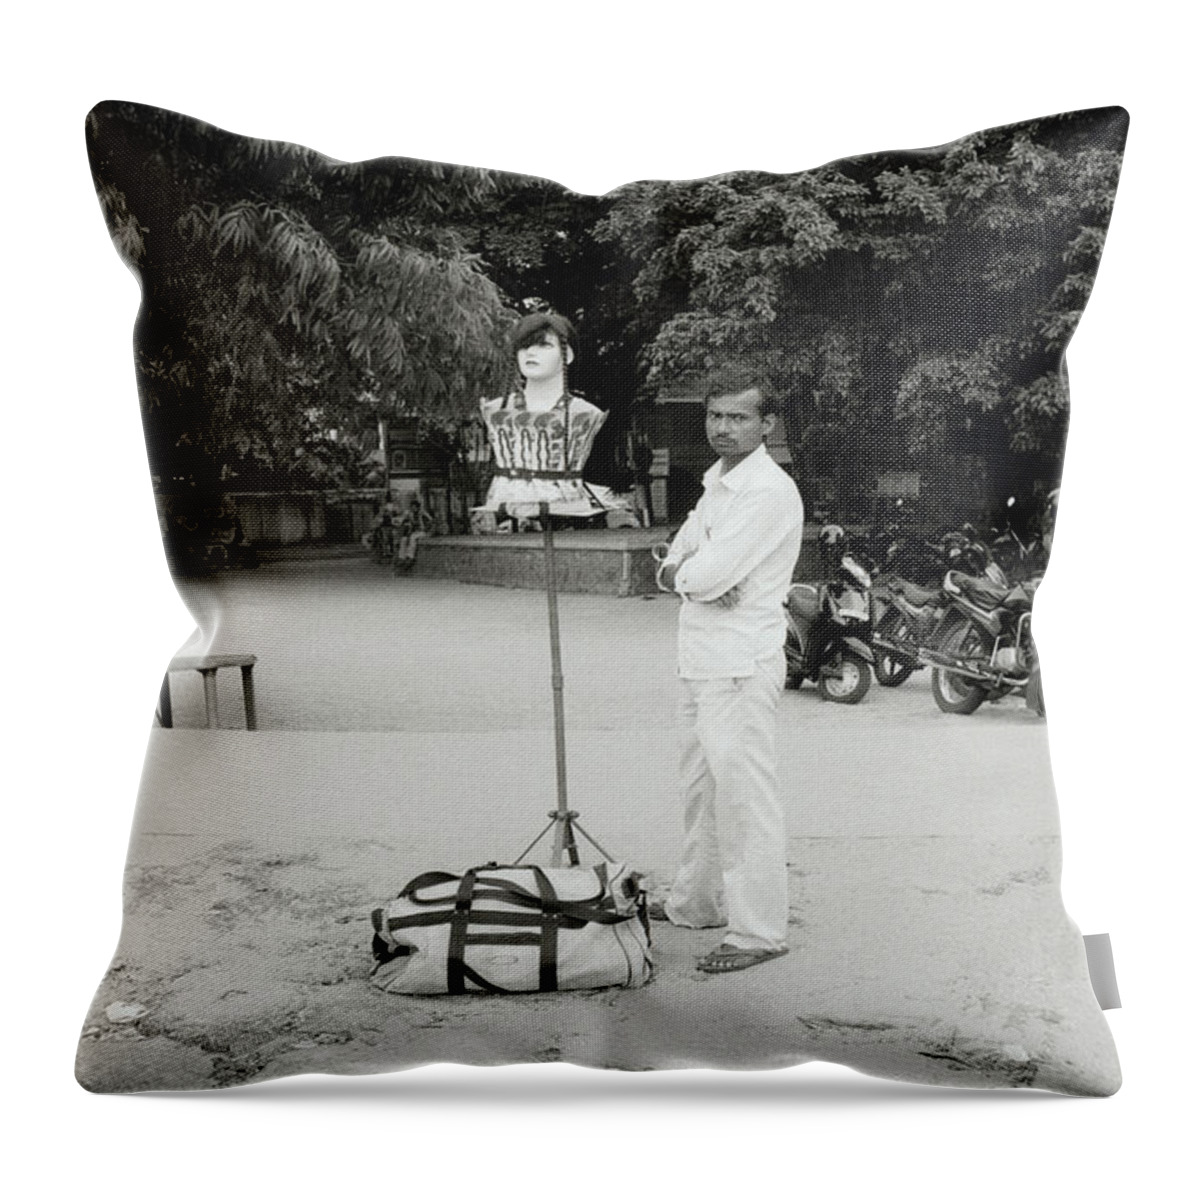 Eccentric Throw Pillow featuring the photograph The Wig Seller by Shaun Higson